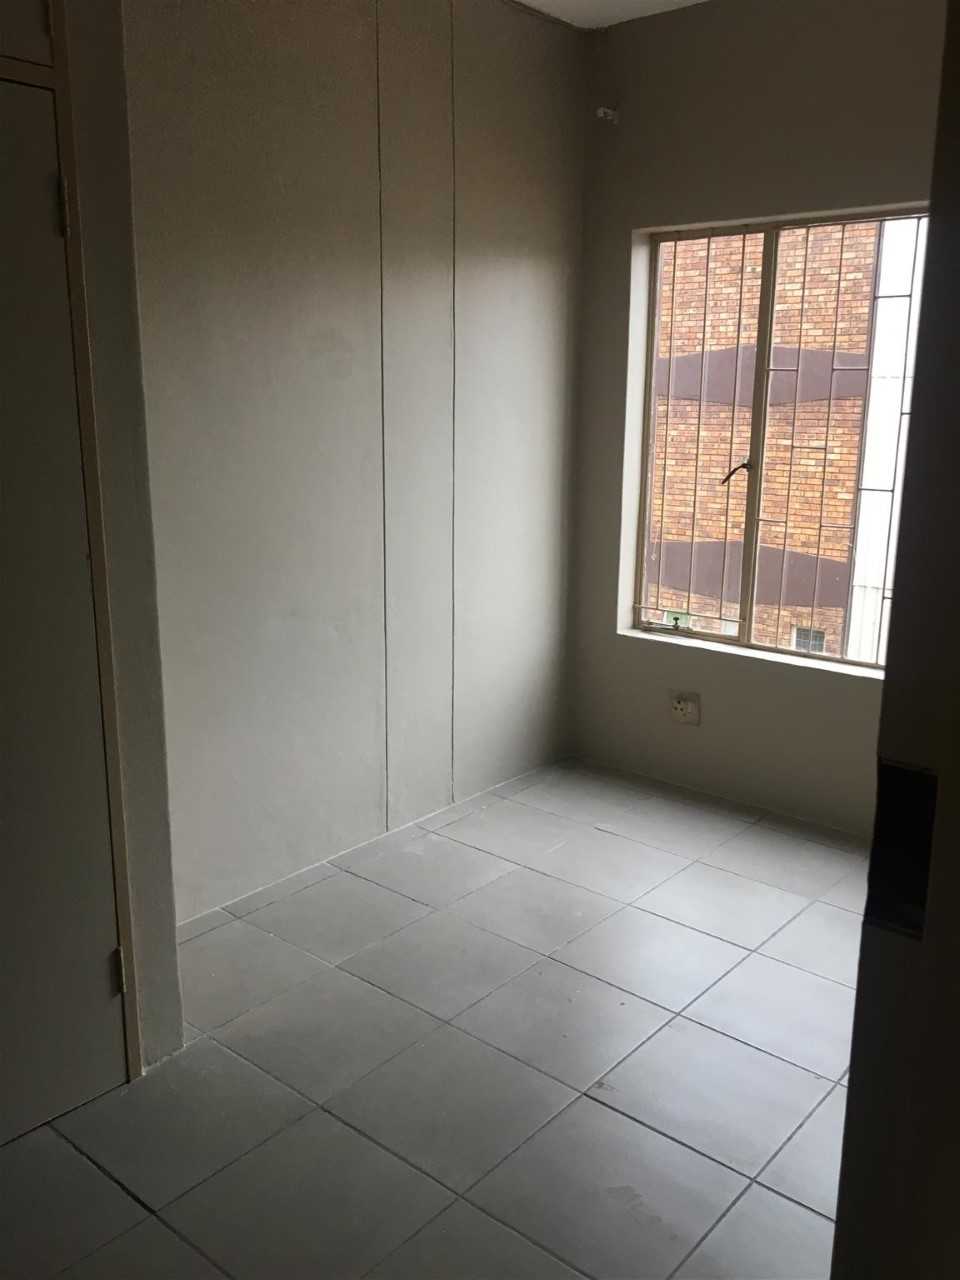 1 Bedroom Flat Available Immediately In Pretoria West Rent Is R3700 Deposit Is 1 Month S Rent Water And Electricity Is Prepaid Call Tshidi Malete